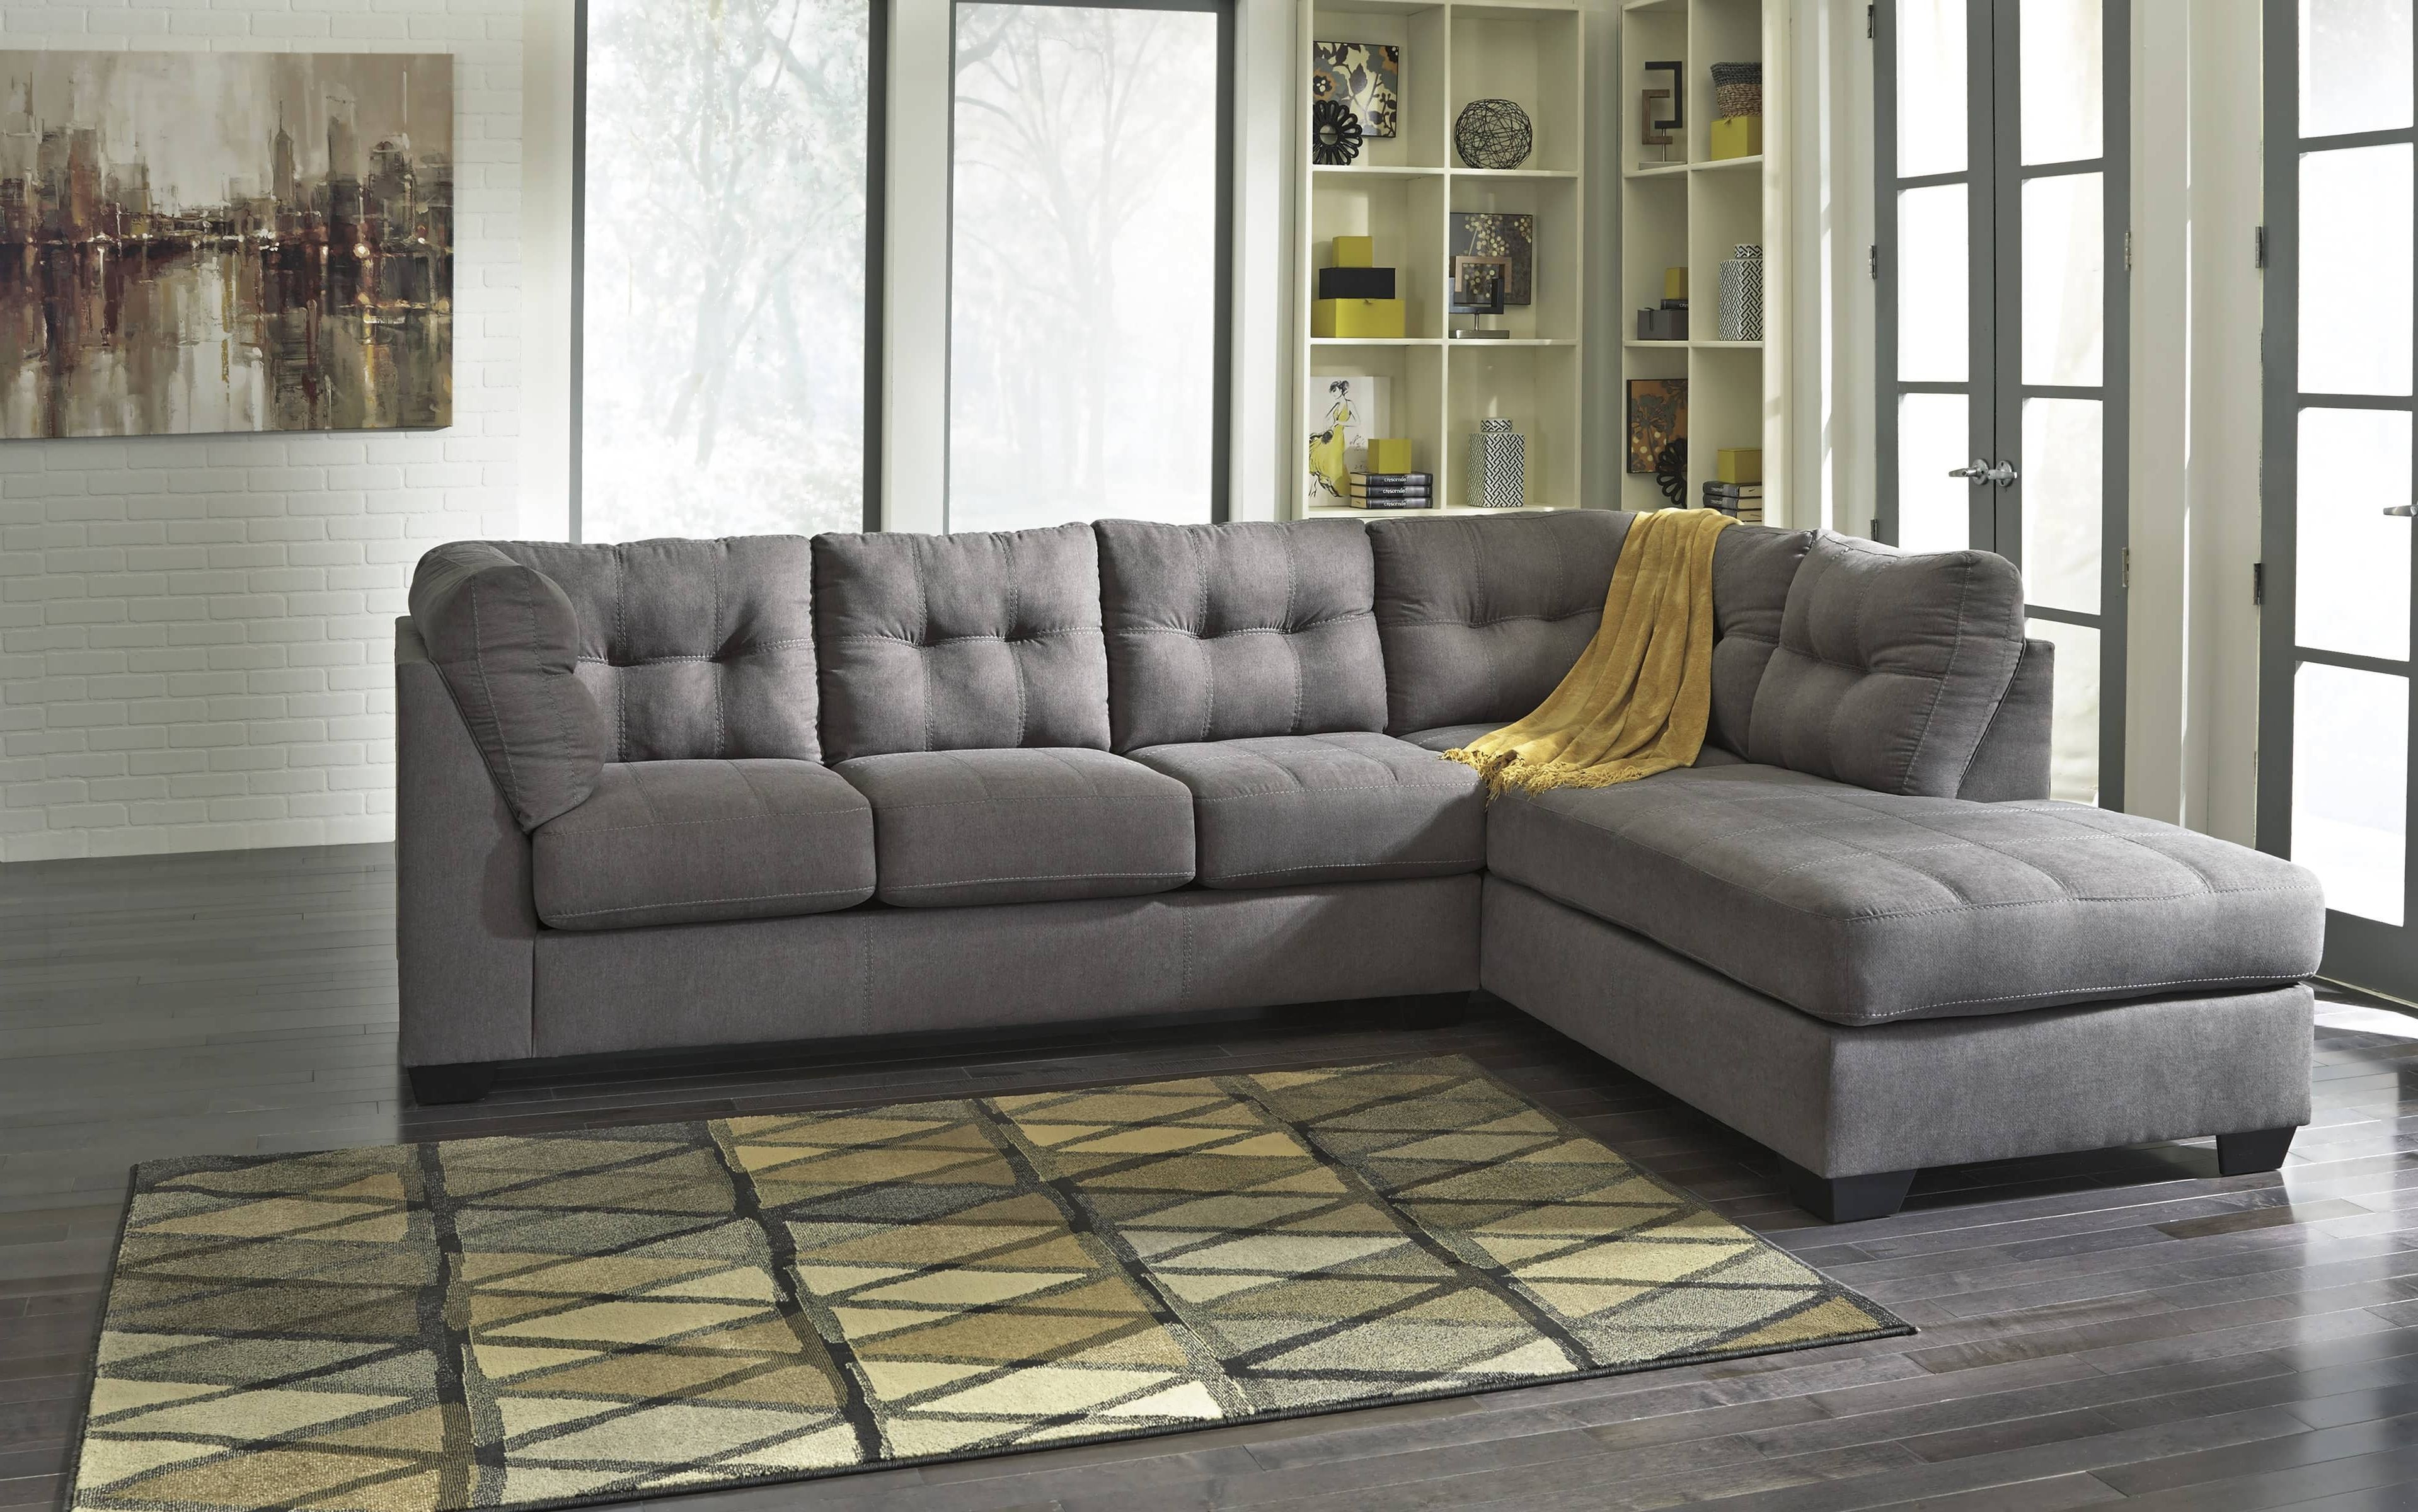 Trendy Chaise Sectionals For Sofa : Small Sleeper Sofa Sectional Sleeper Sofa With Chaise (View 10 of 15)